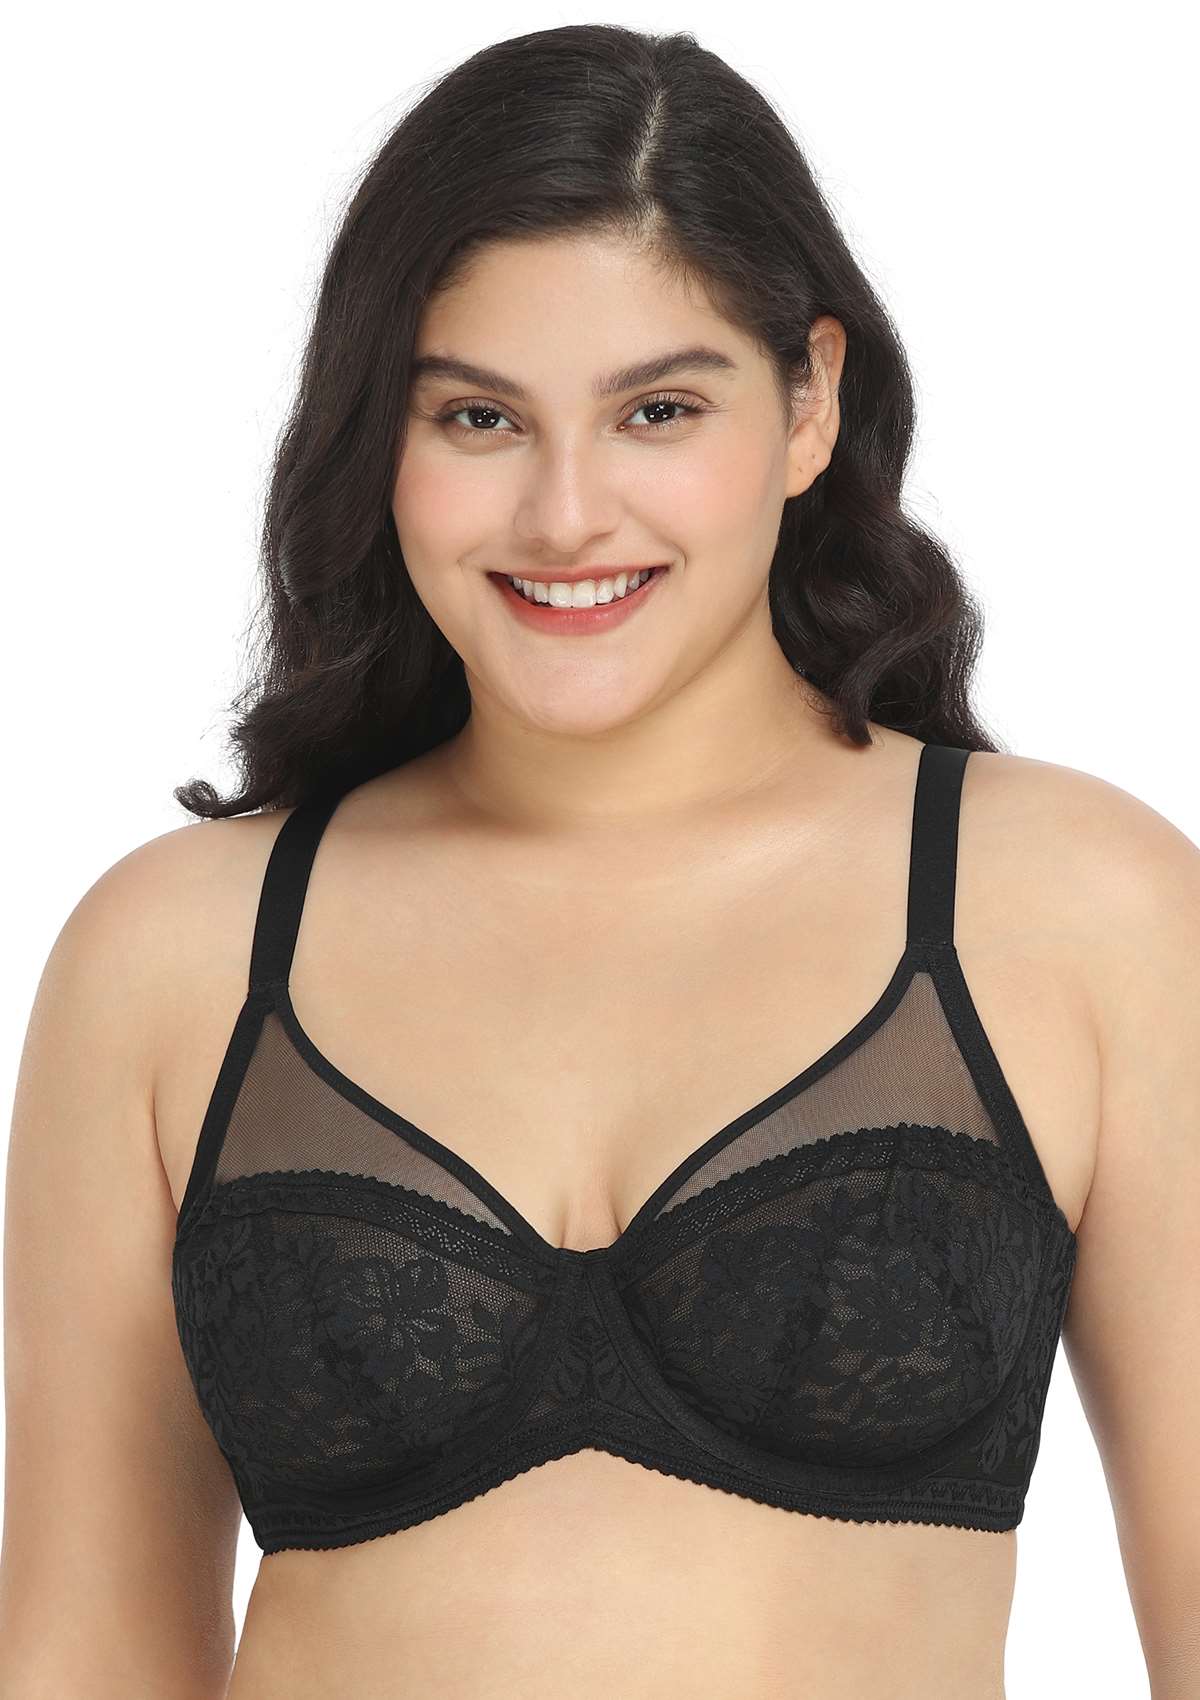 HSIA Gladioli Lace Mesh Minimizing Unlined Underwire Bra For Fuller Busts - Black / 44 / DD/E